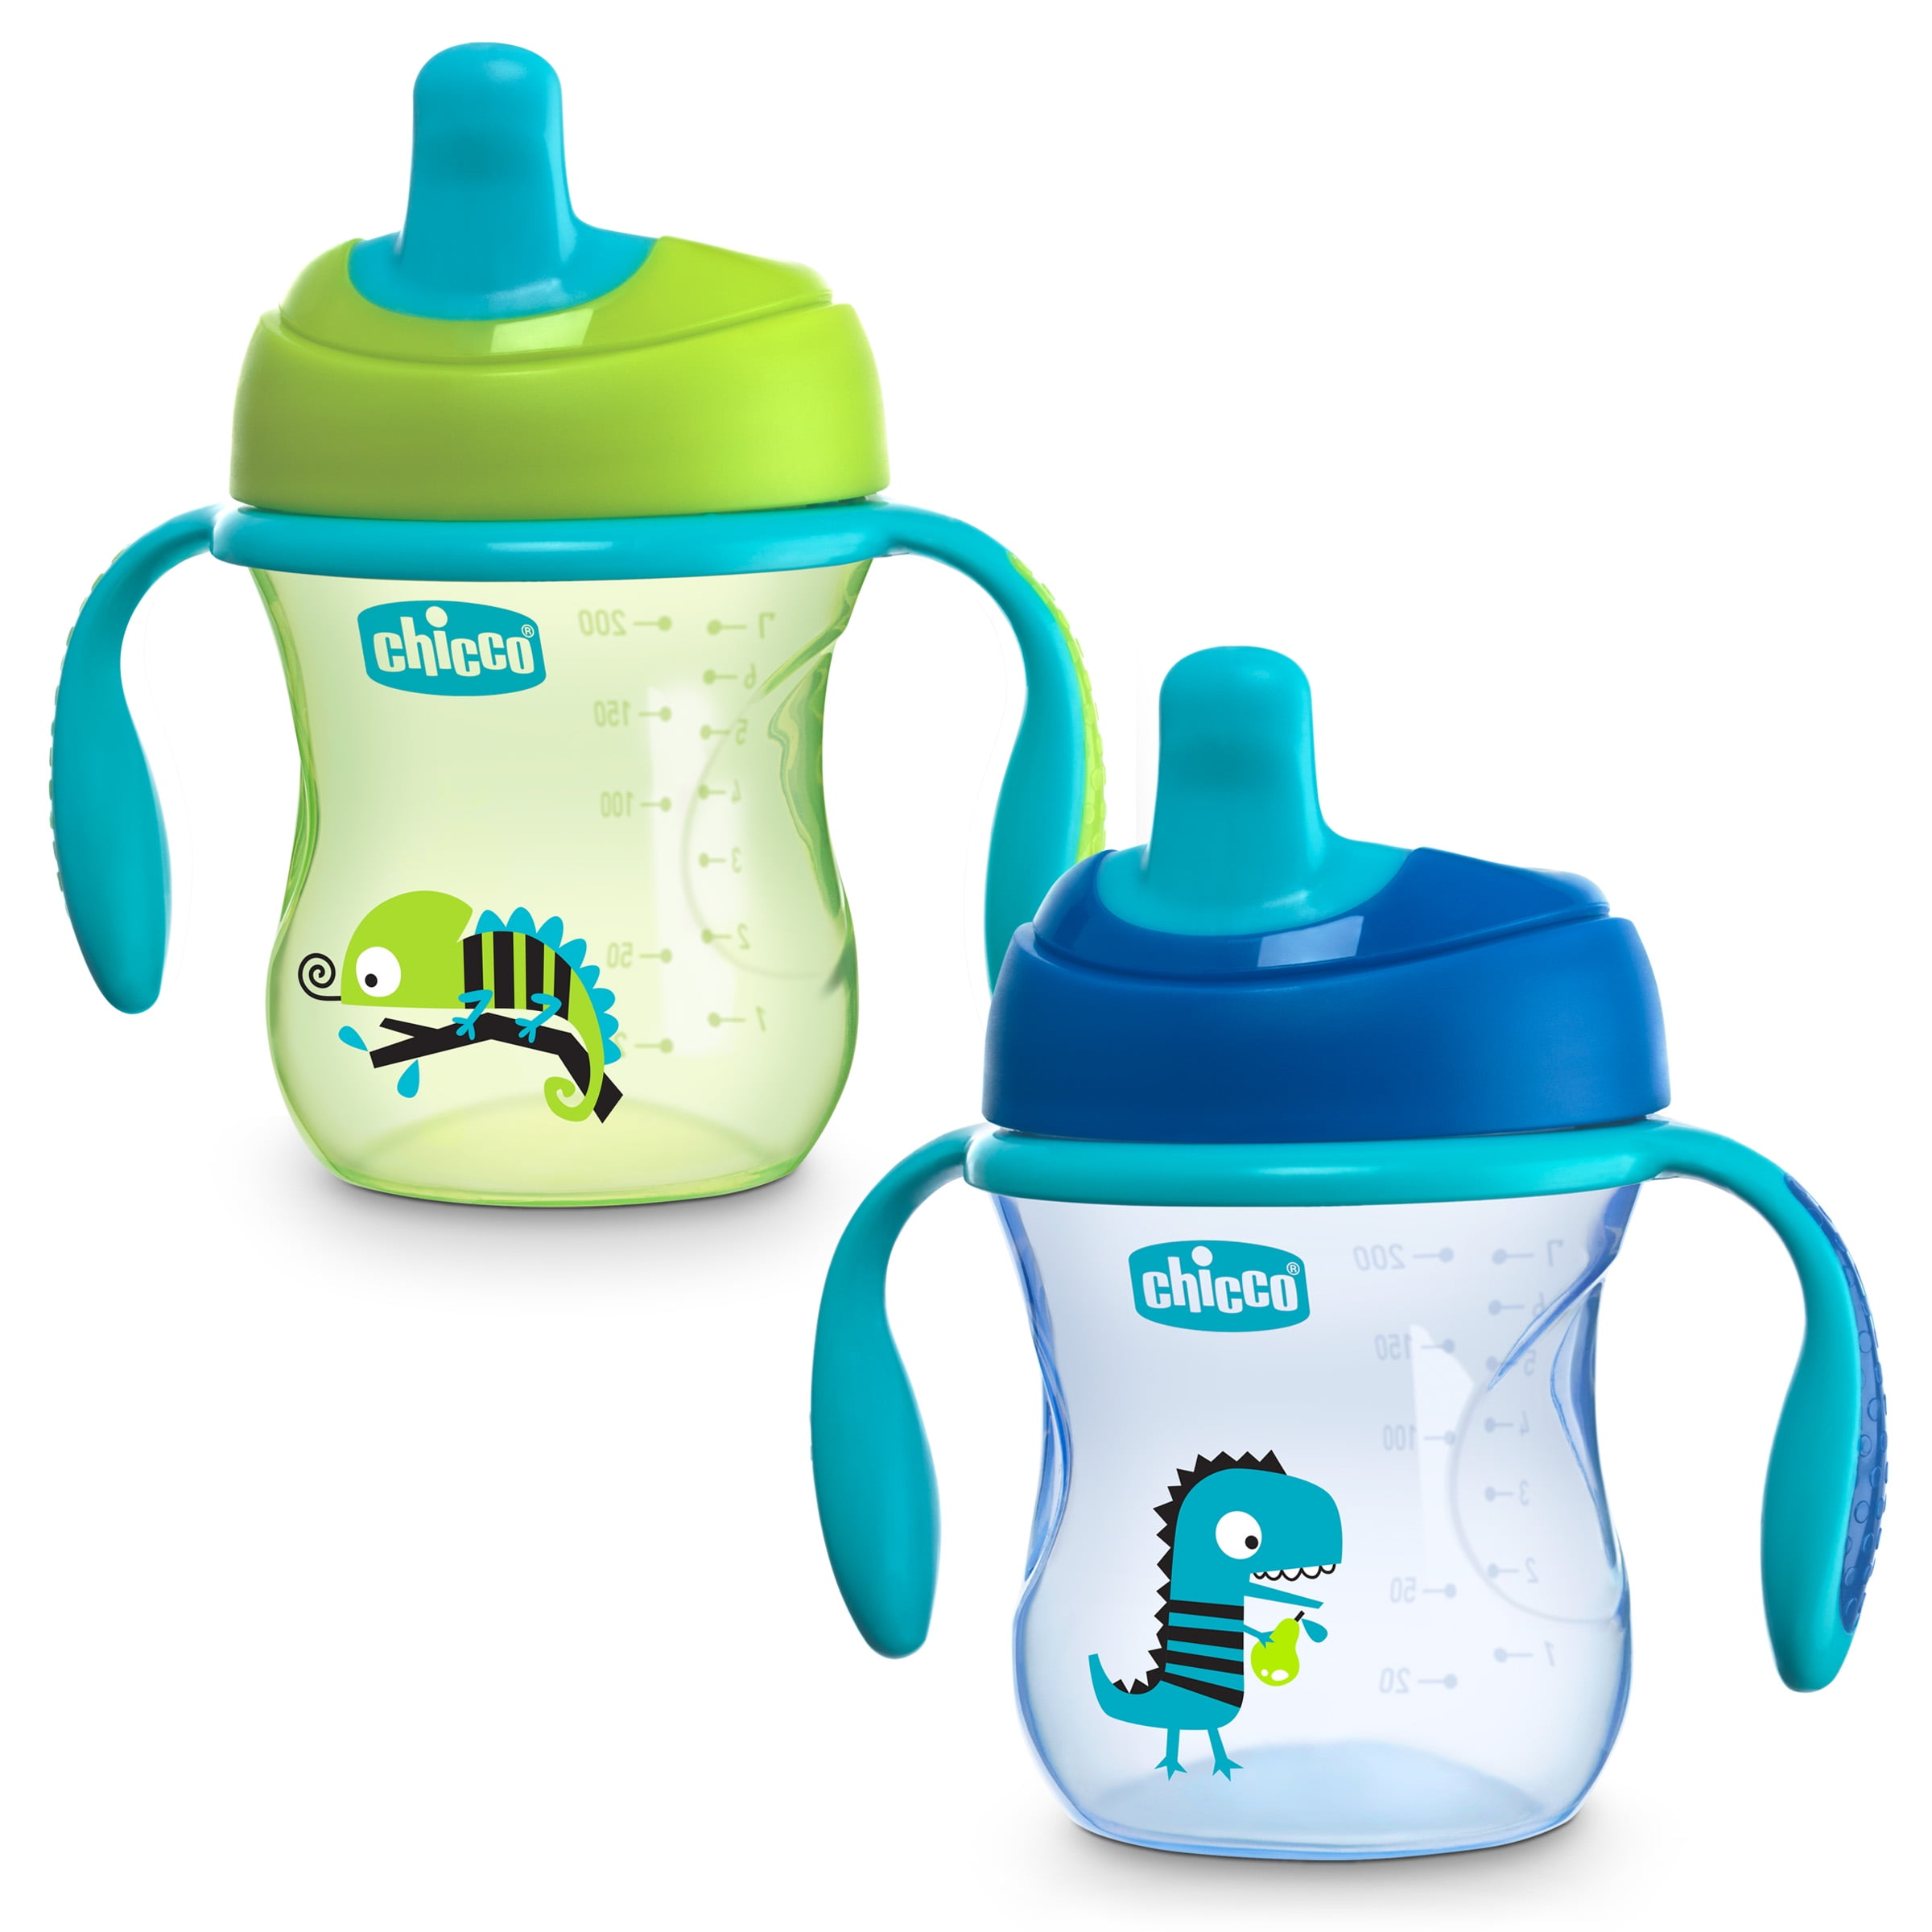 Vaso Chicco Antiderrame Transition Cup 4 meses Cups